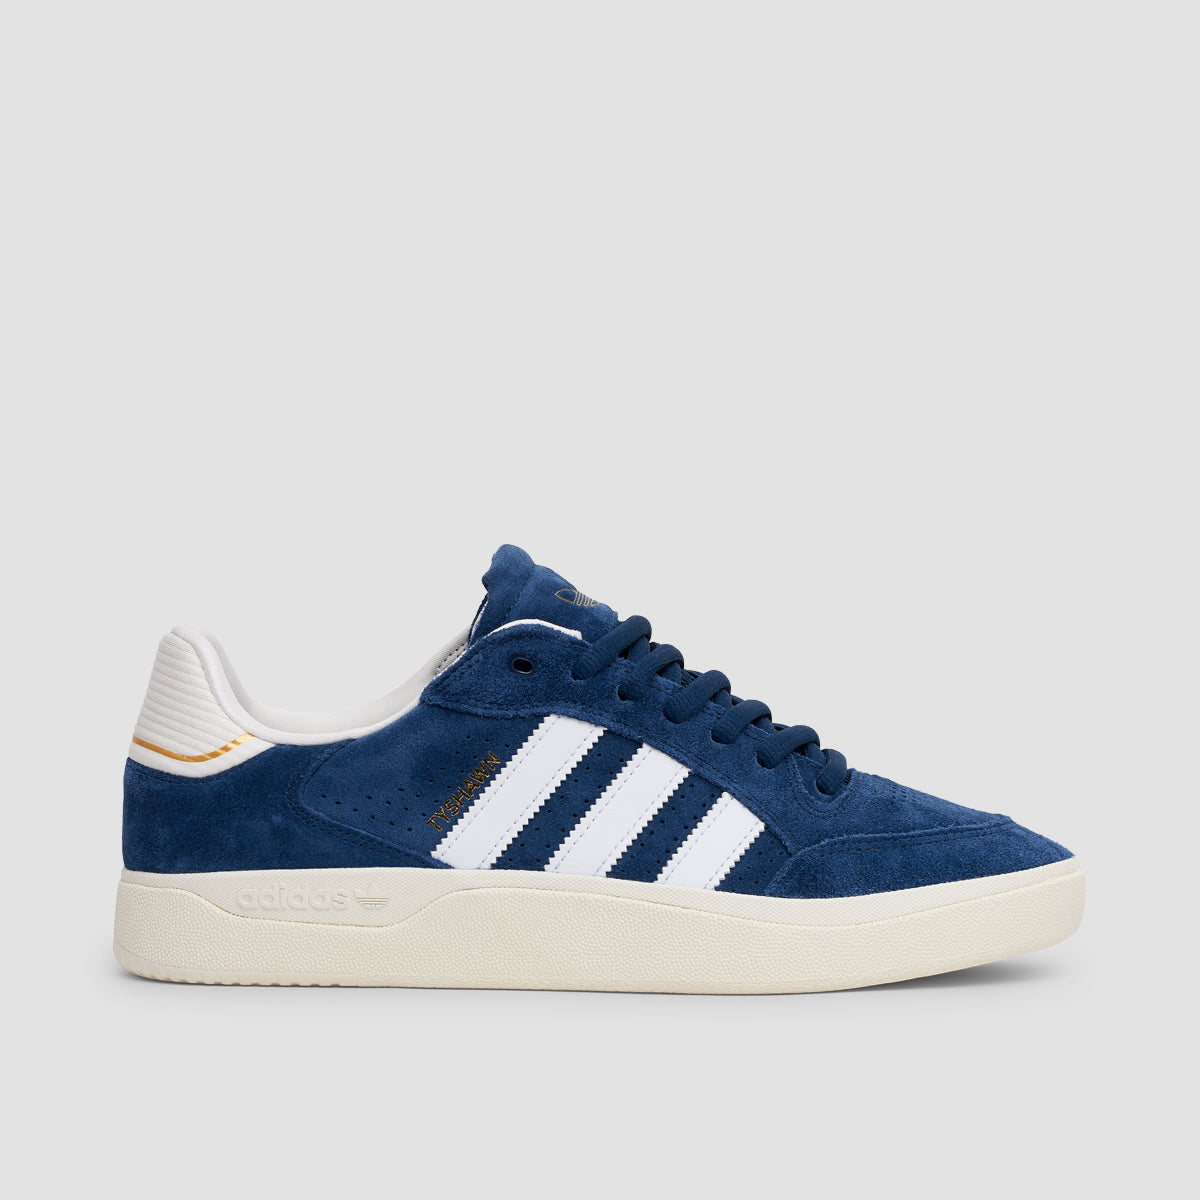 adidas Tyshawn Low Shoes - Collegiate Navy/Footwear White/Core white